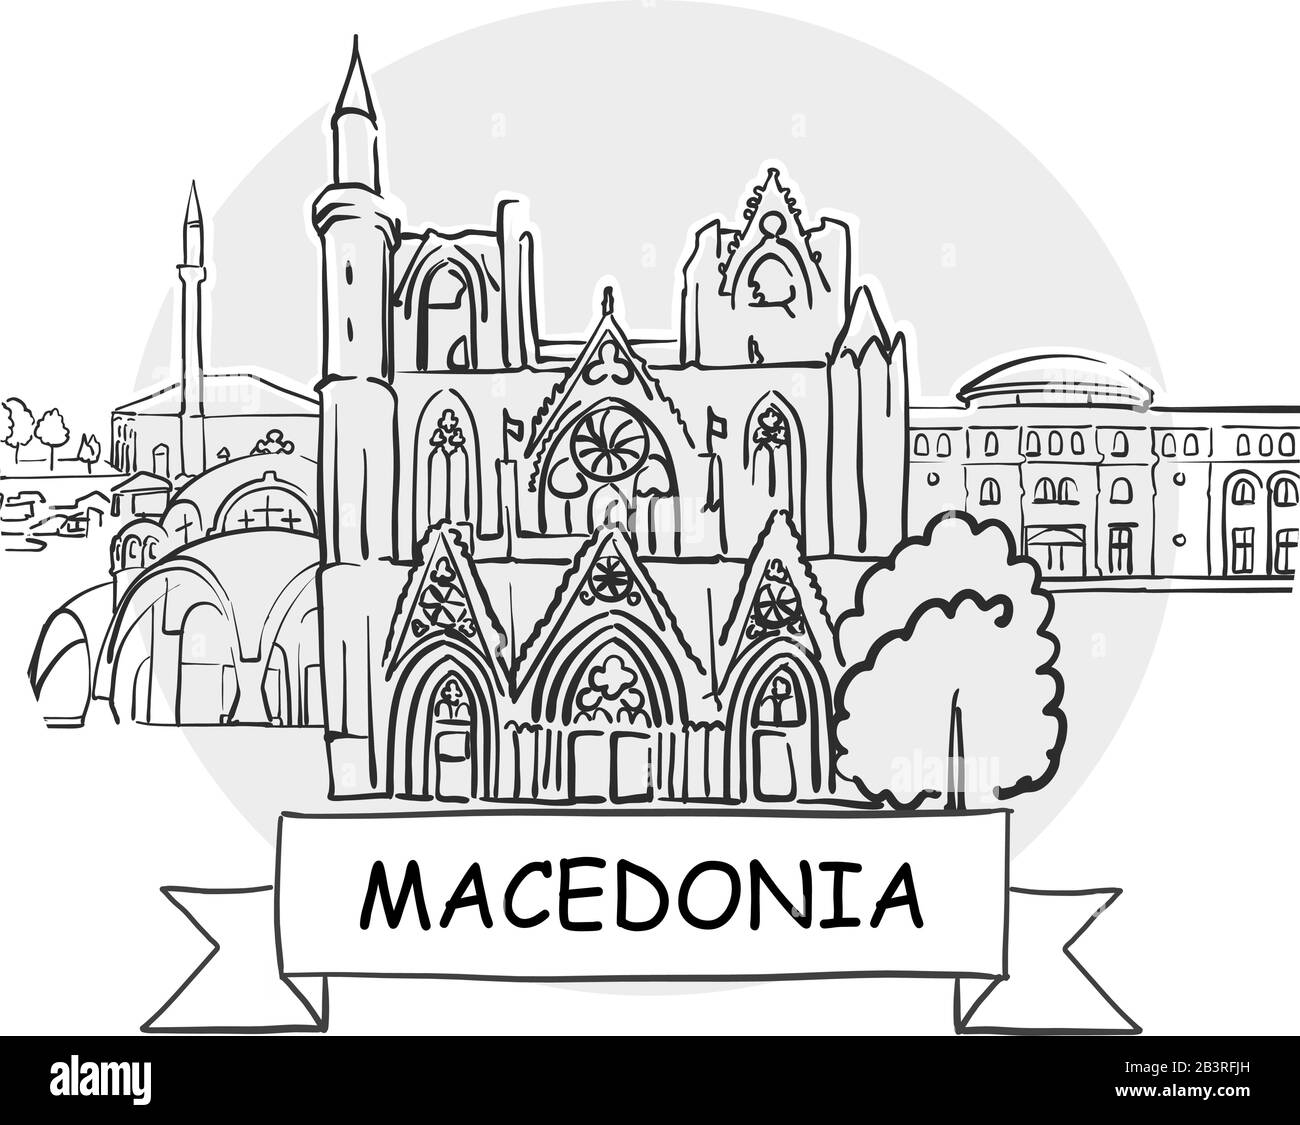 Macedonia Hand-Drawn Urban Vector Sign. Black Line Art Illustration with Ribbon and Title. Stock Vector